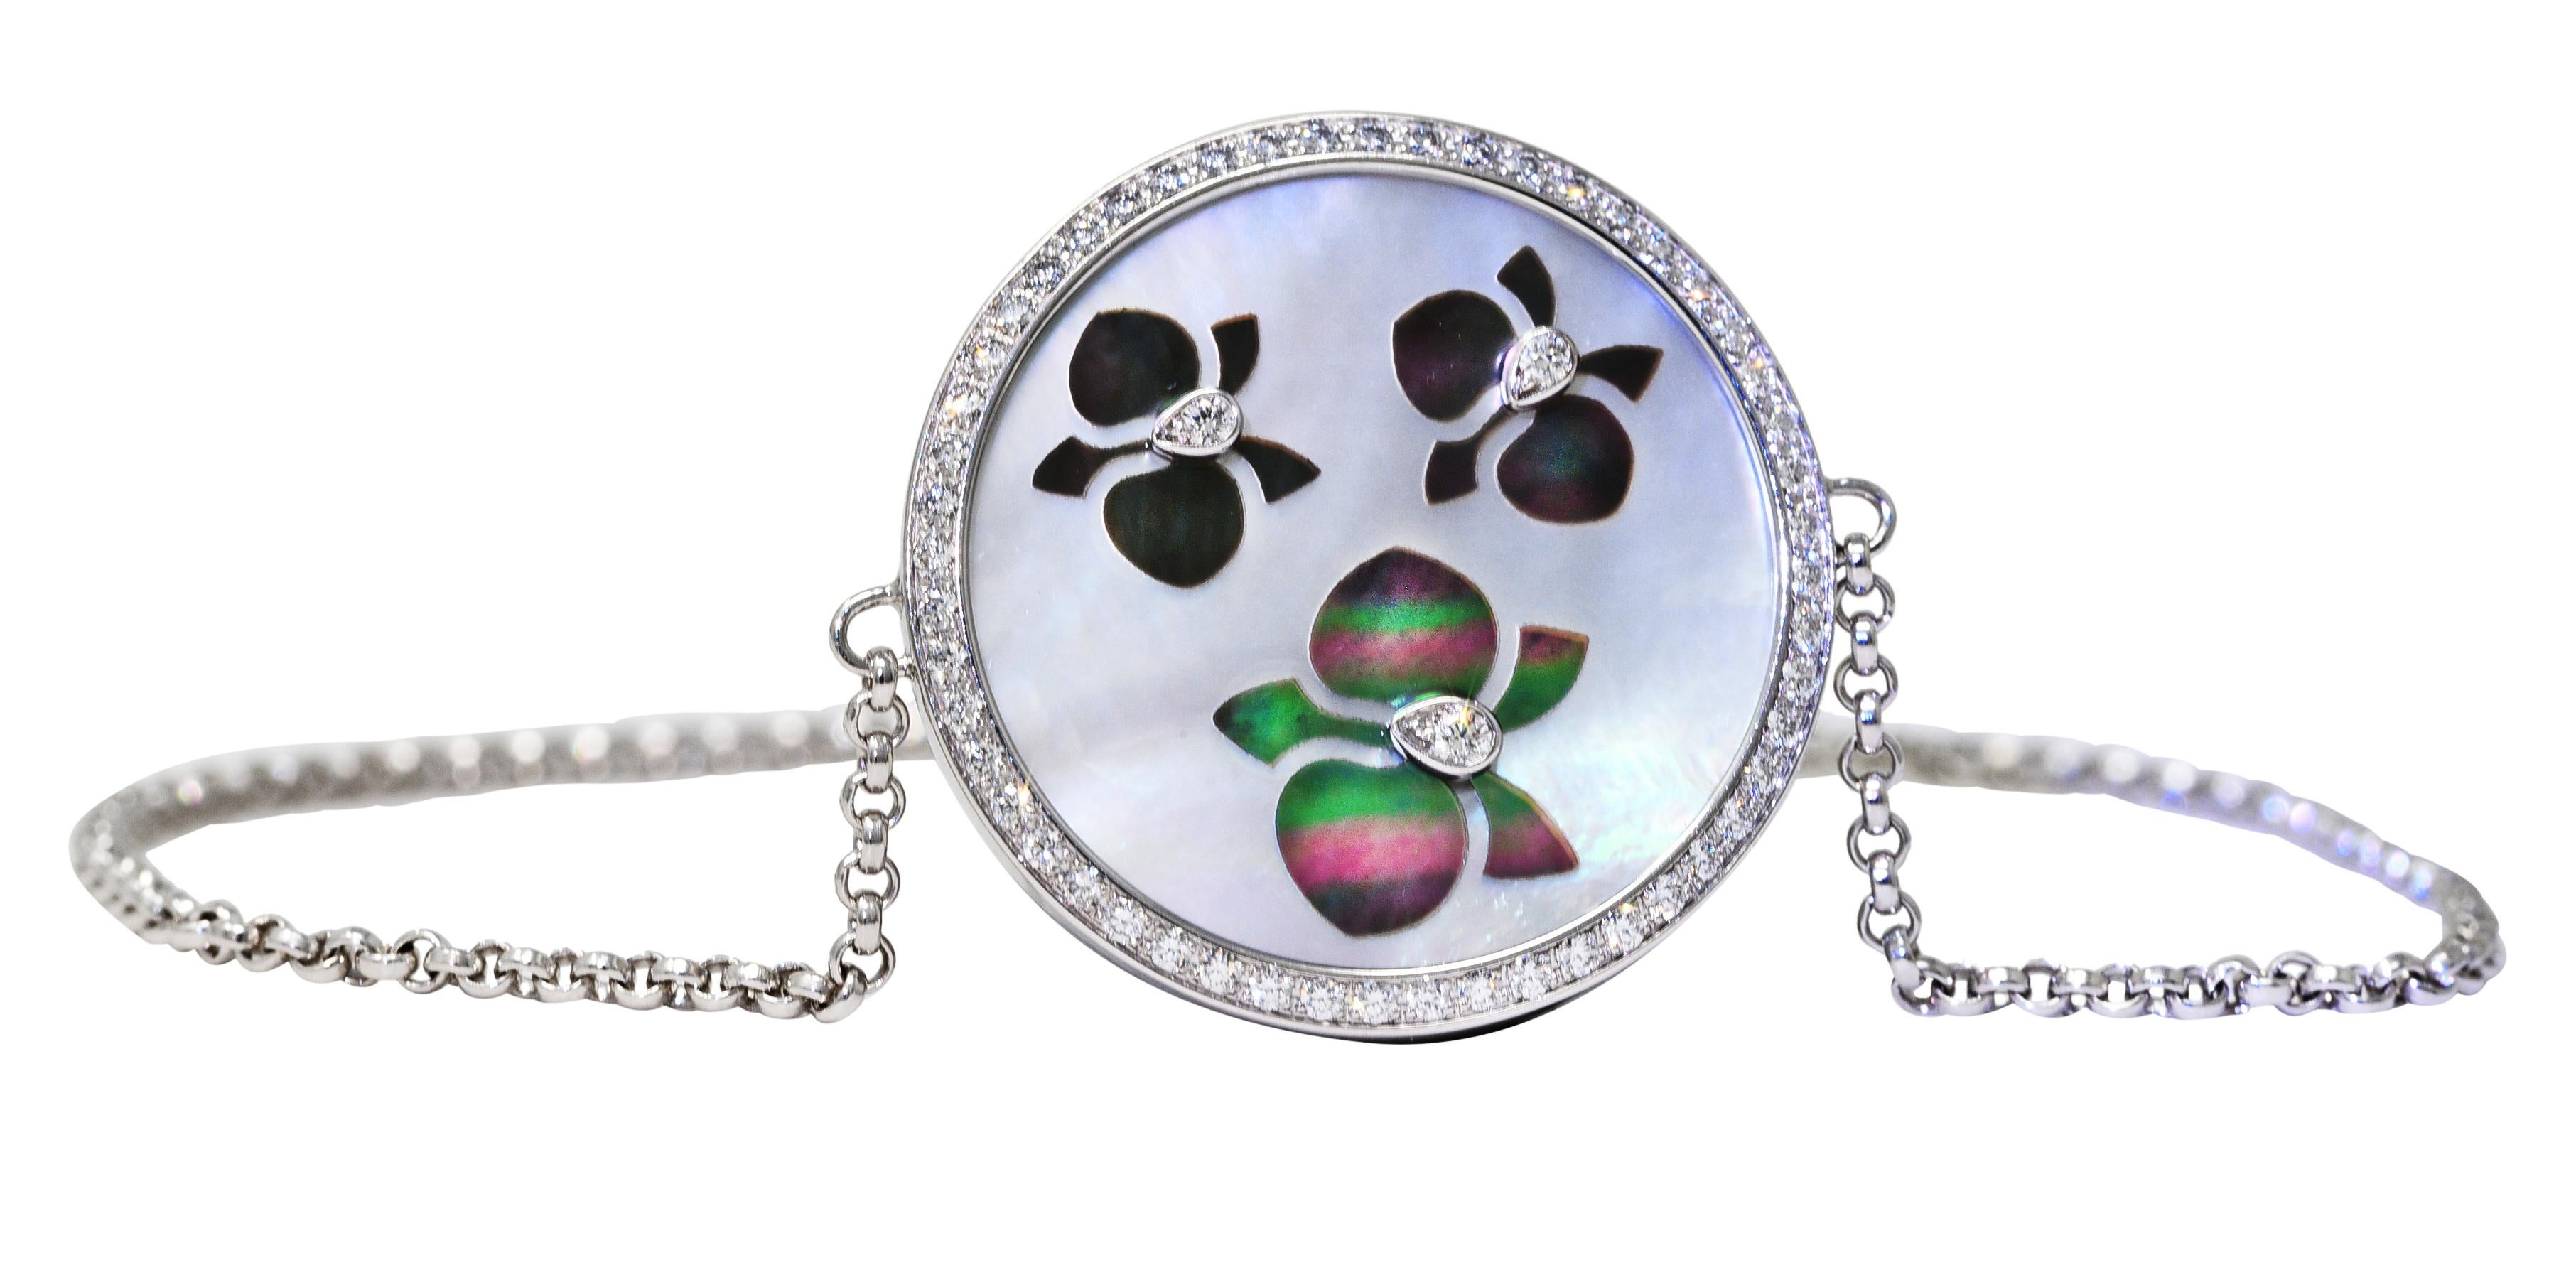 Comprised of cable chain centering a round disk shaped station with a tablet of mother-of-pearl. Measuring 18.5 mm round - opaque white in body color with strong spectral iridescence. Featuring an inlaid orchid motif of mother of pearl - gray in